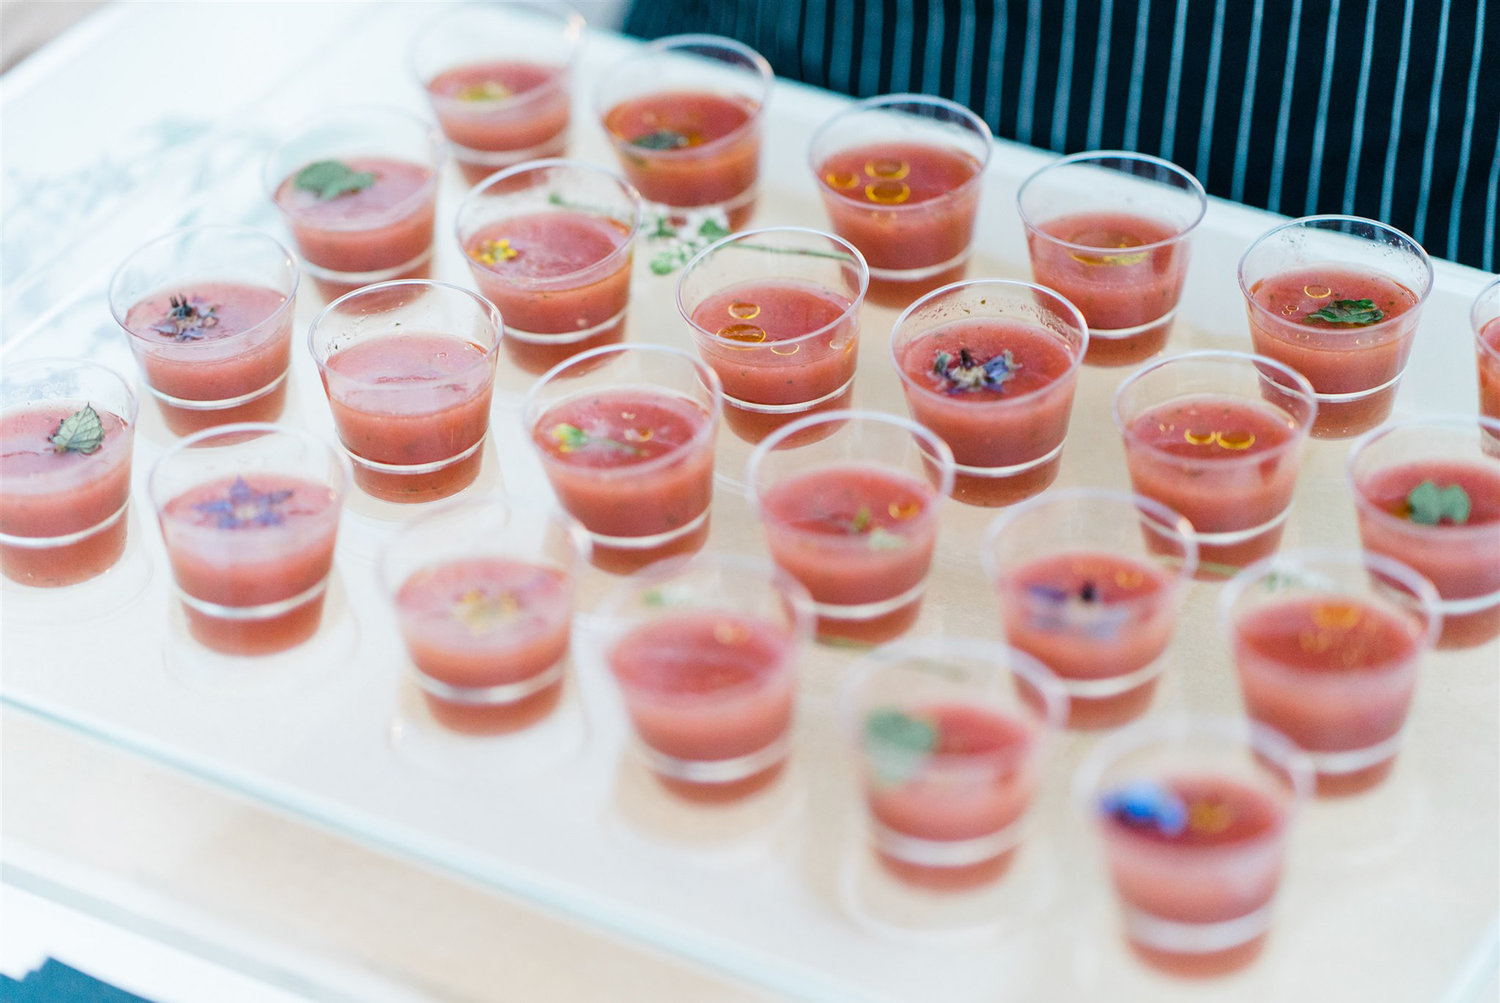 Watermelon gazpacho shooters infuse a summer cocktail hour with chill vibes and bright color